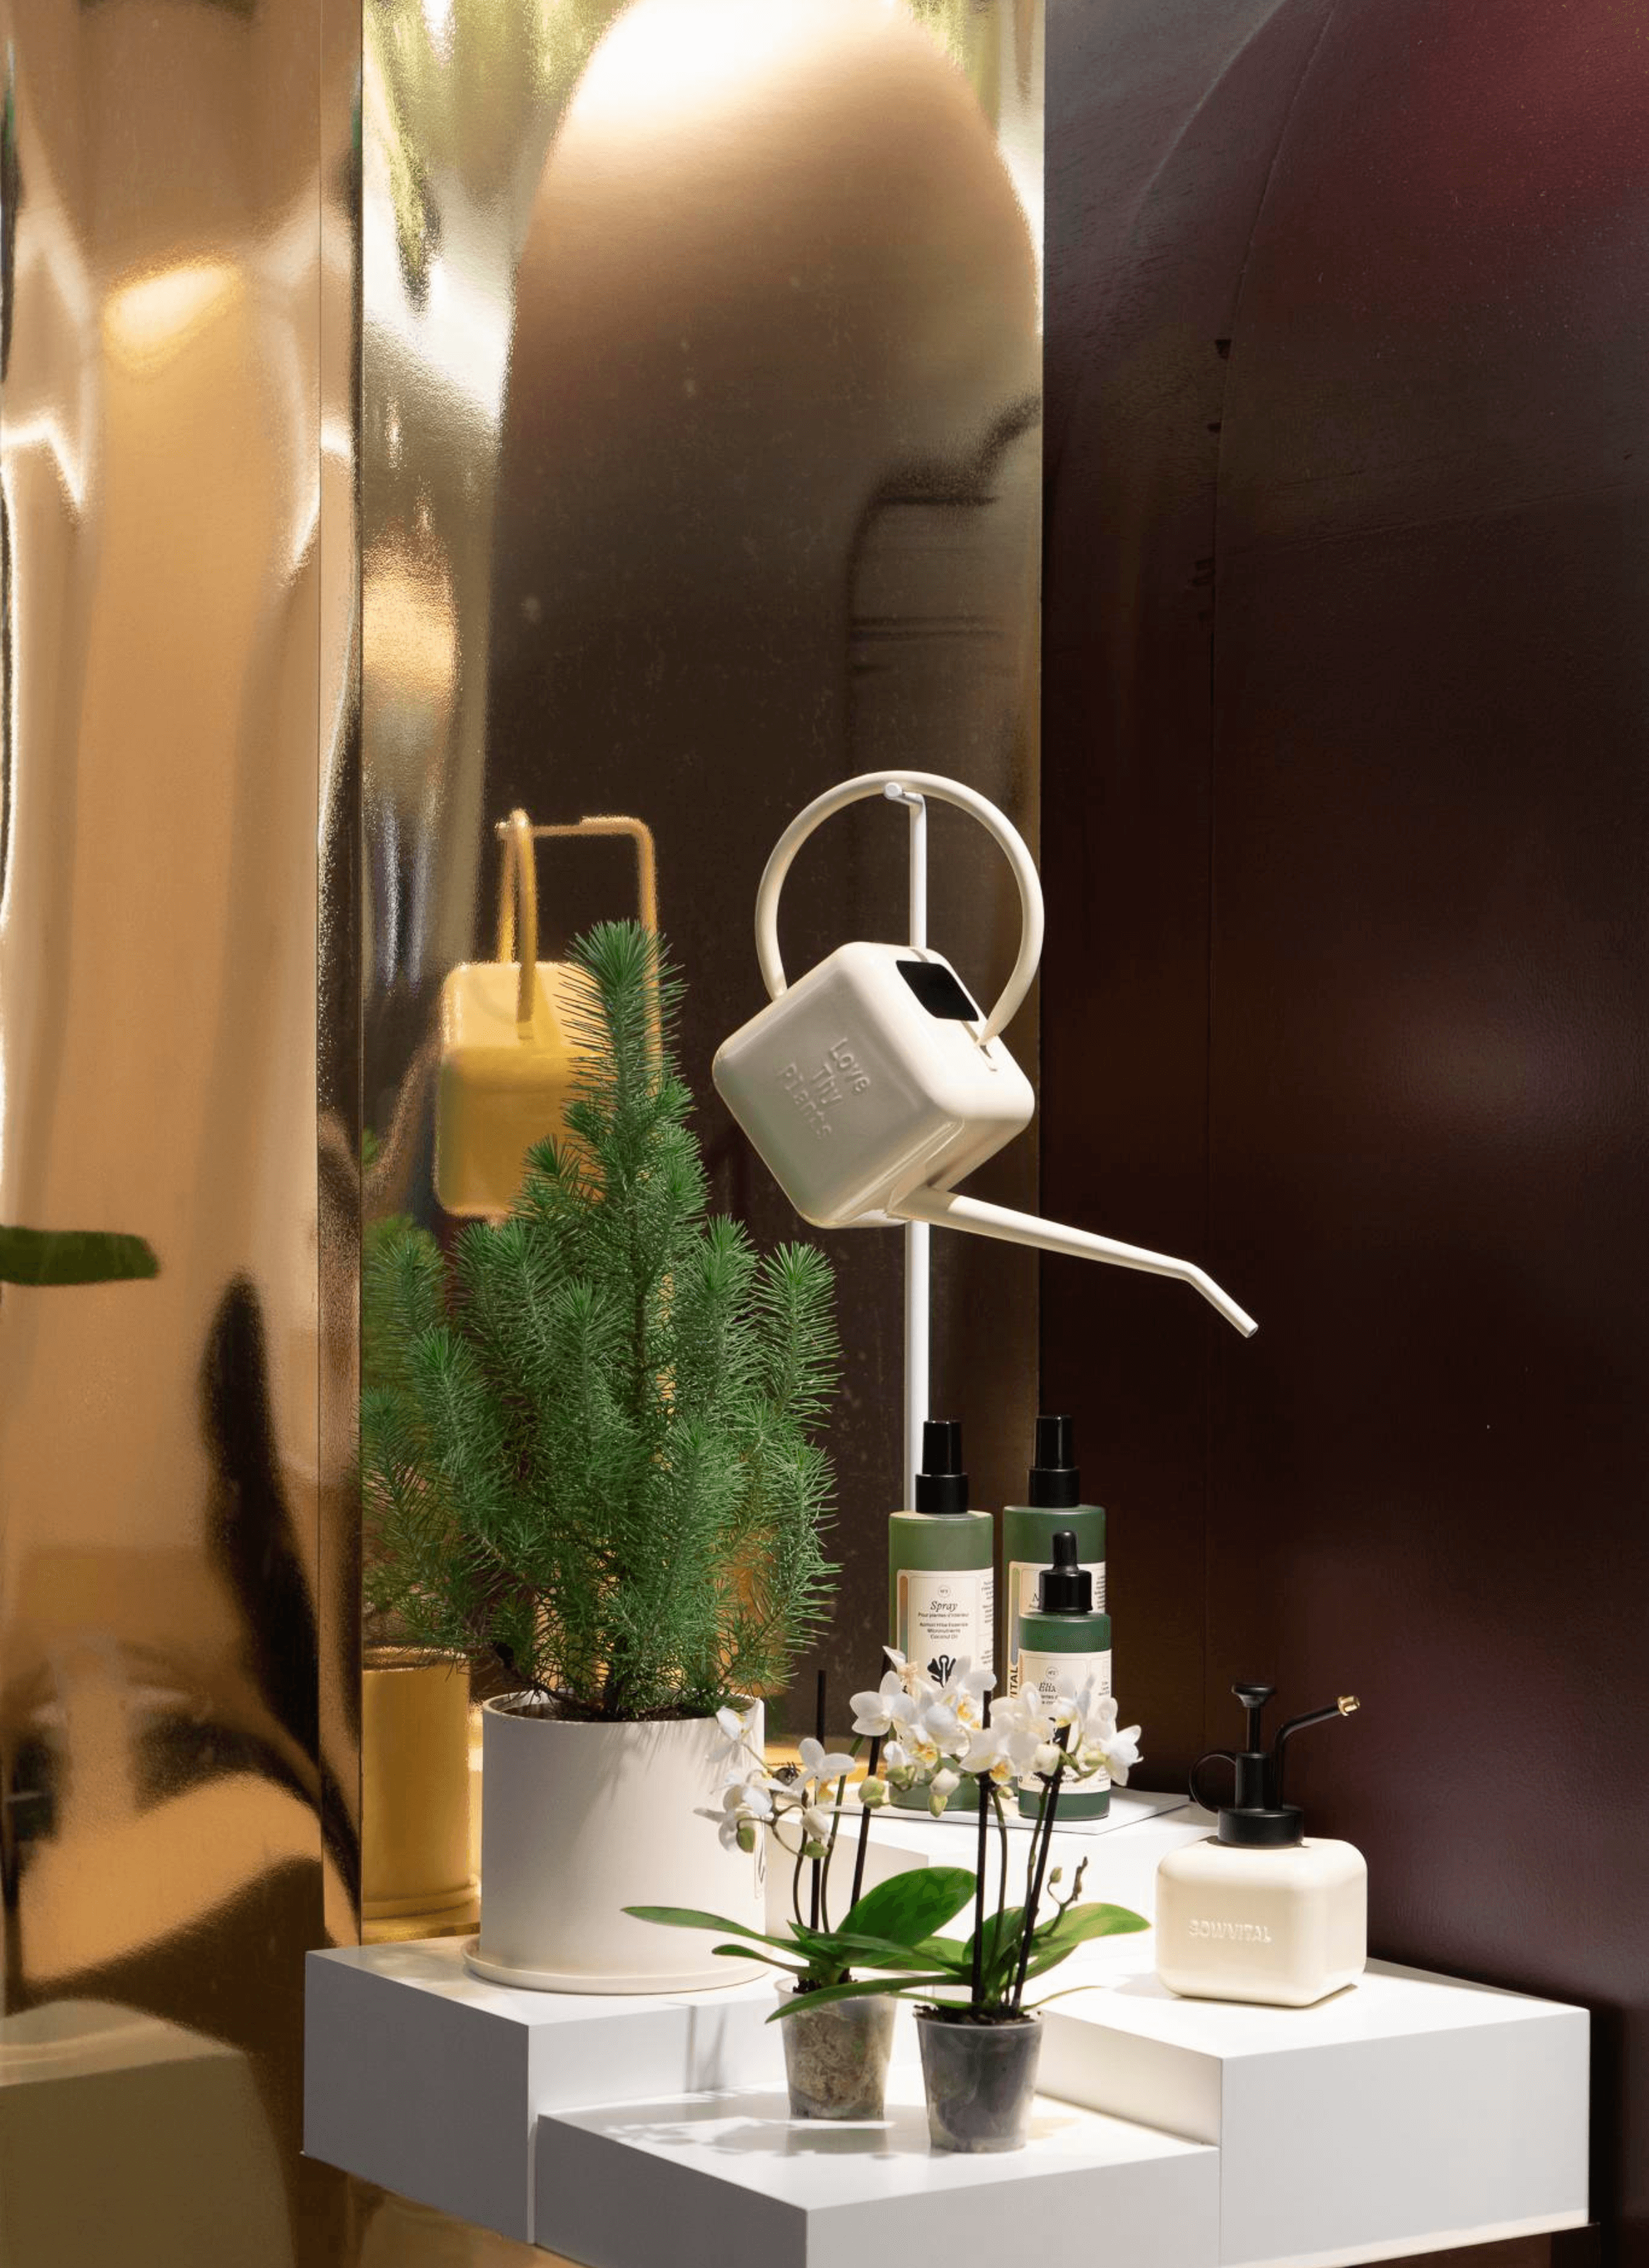 Sowvital beige watering can, along with house plant fertilizers and a beige mister, hung up on display. Nearby, a potted plant sits alongside two pots of white orchids as part of the decorations..